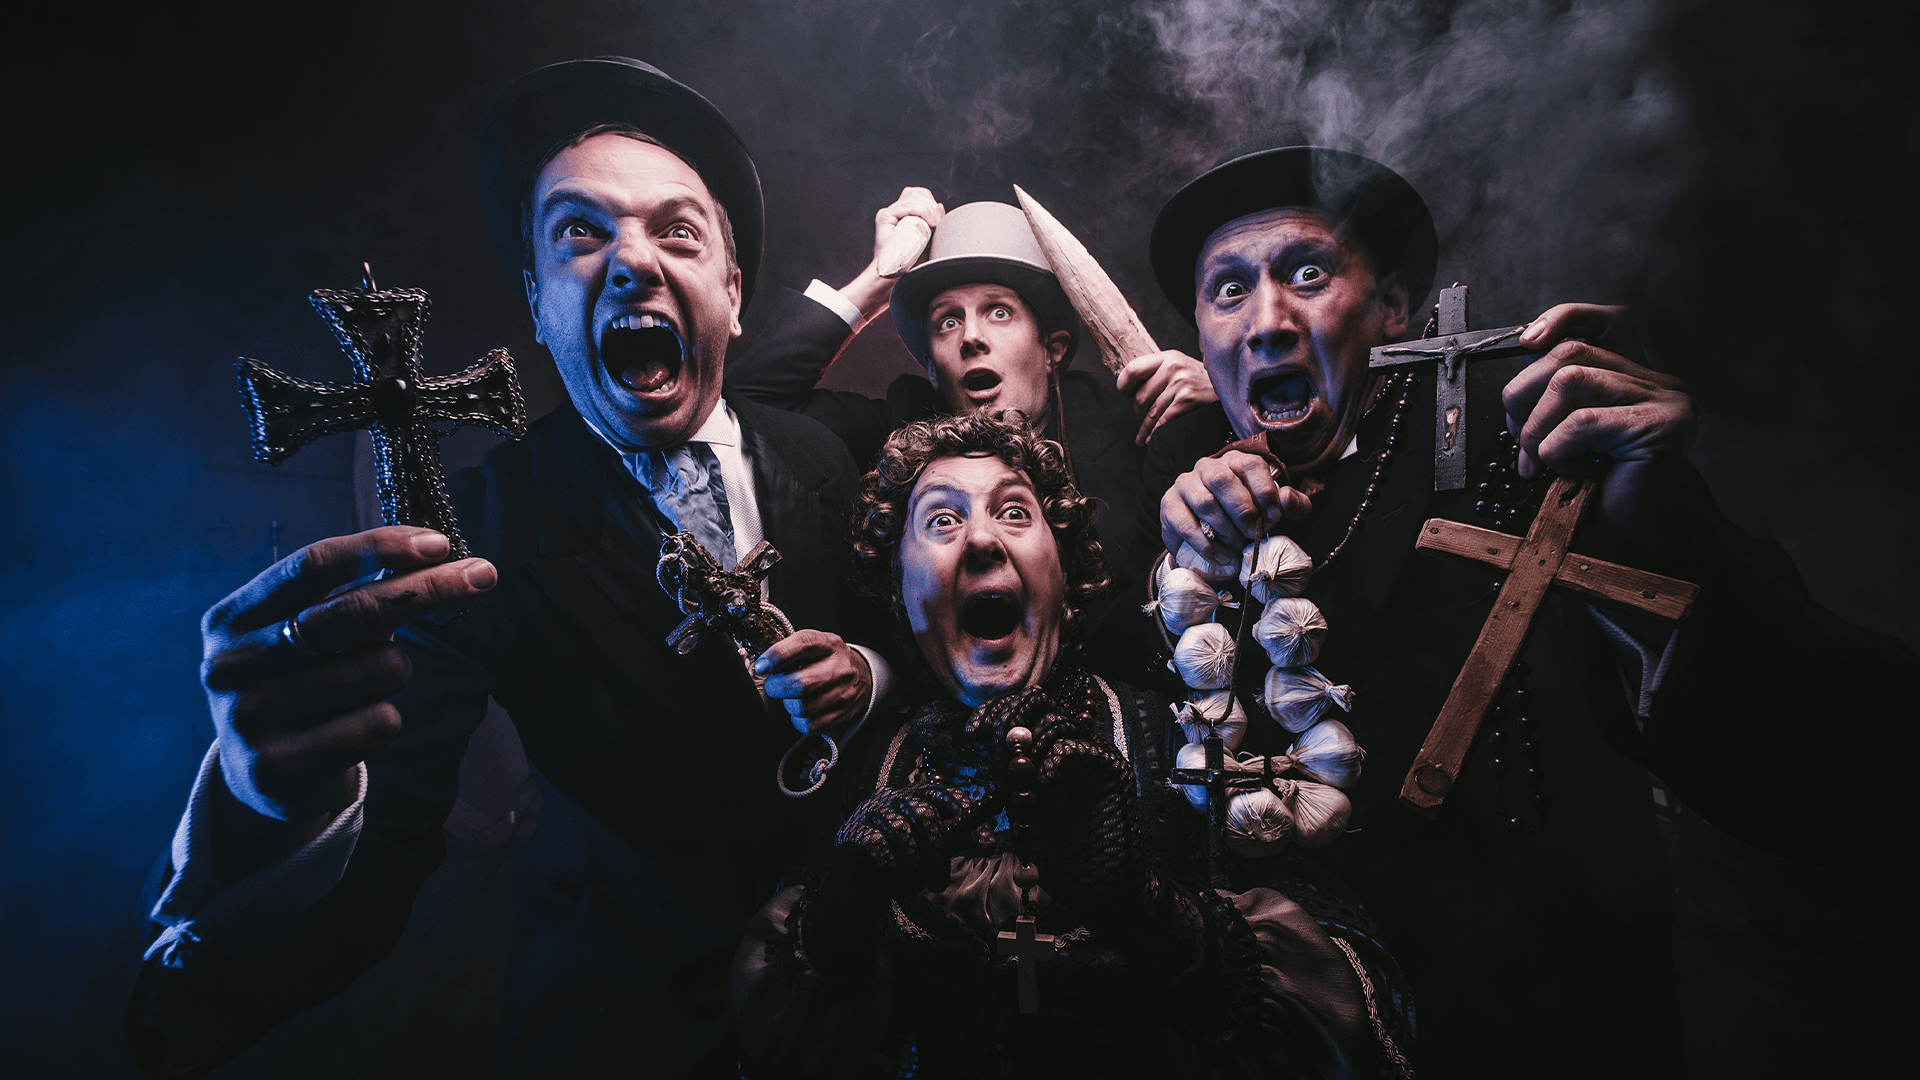 Black, smoke-filled backgrond. Four members of Le Navet Bete scream in horror at the camera. The performers on the left-hand side of the image is wearing dark clothing, a top hat and holding two crosses. The performer on the right-hand side is wearing dark clothing and a top hold and is holding garlic and two crosses. The performer at the bottom of the image is holding roasary beads and wearing velvet gloves. The performer at the top of the image is waving wooden stakes above their head.